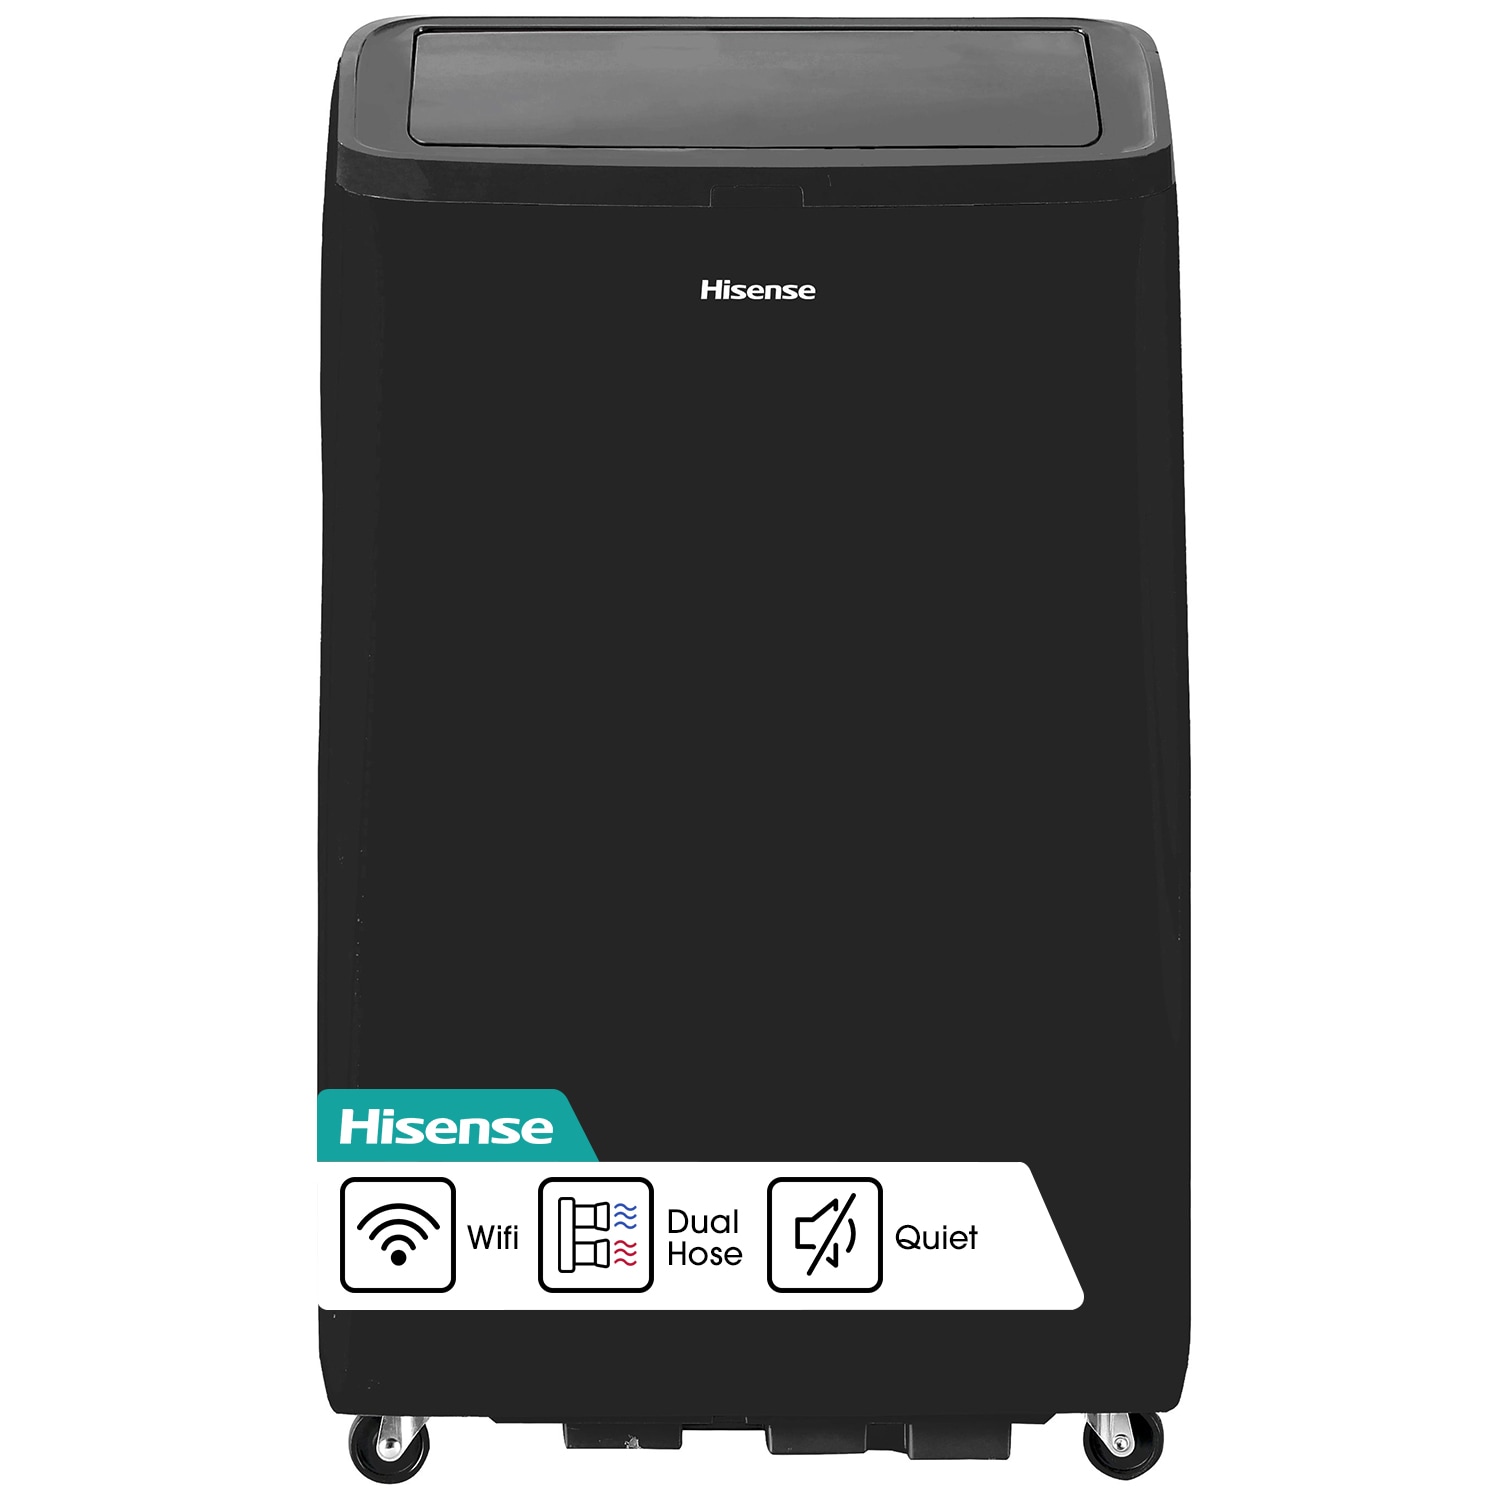 Troubleshoot and Fix: Hisense Portable Air Conditioner Making Loud Noise